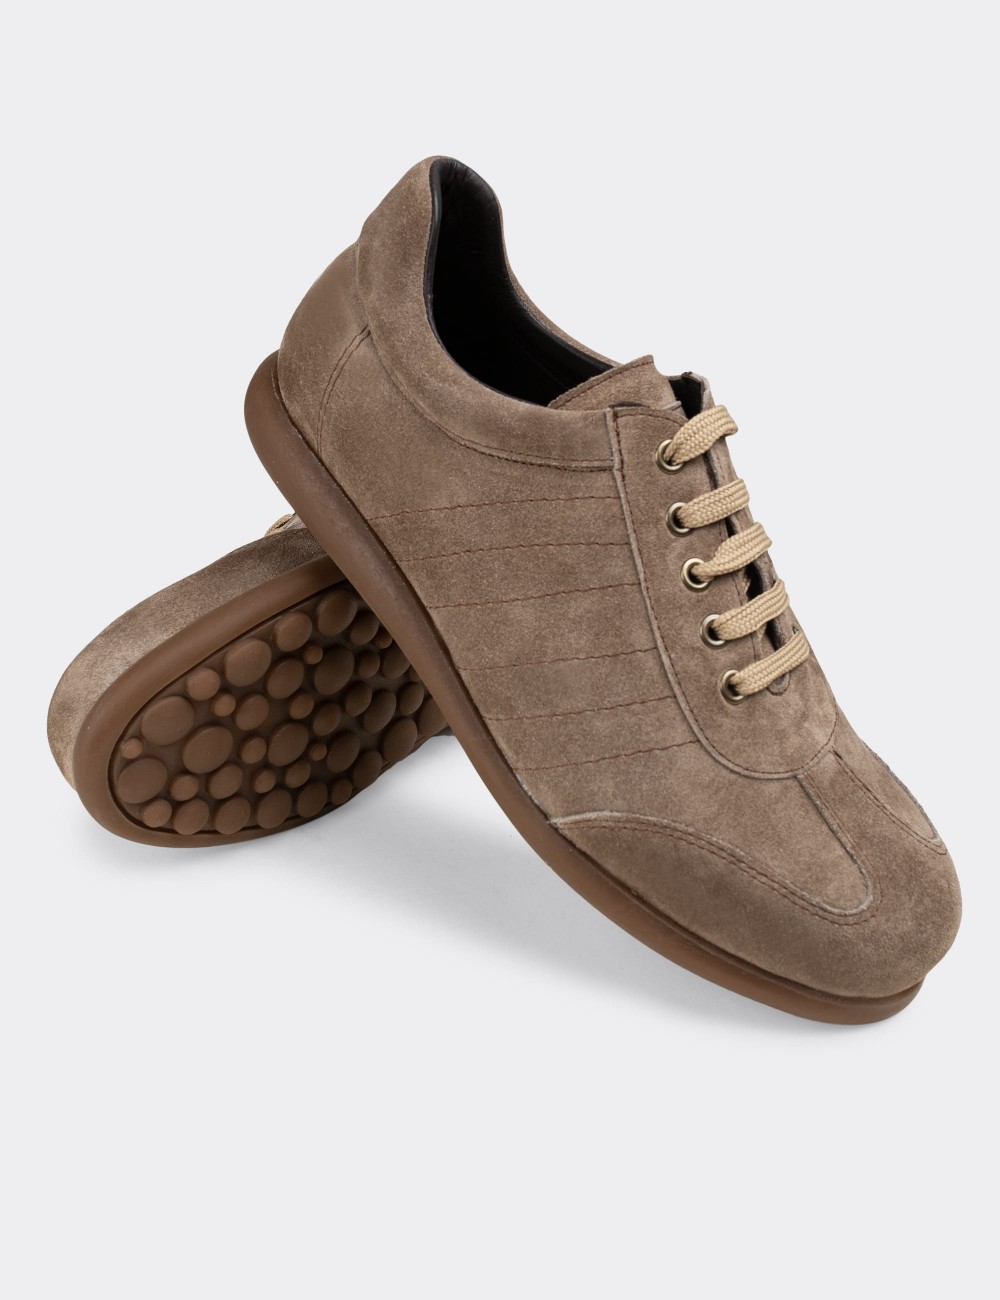 Sandstone Suede Leather Lace-up Shoes - 01826MVZNC01